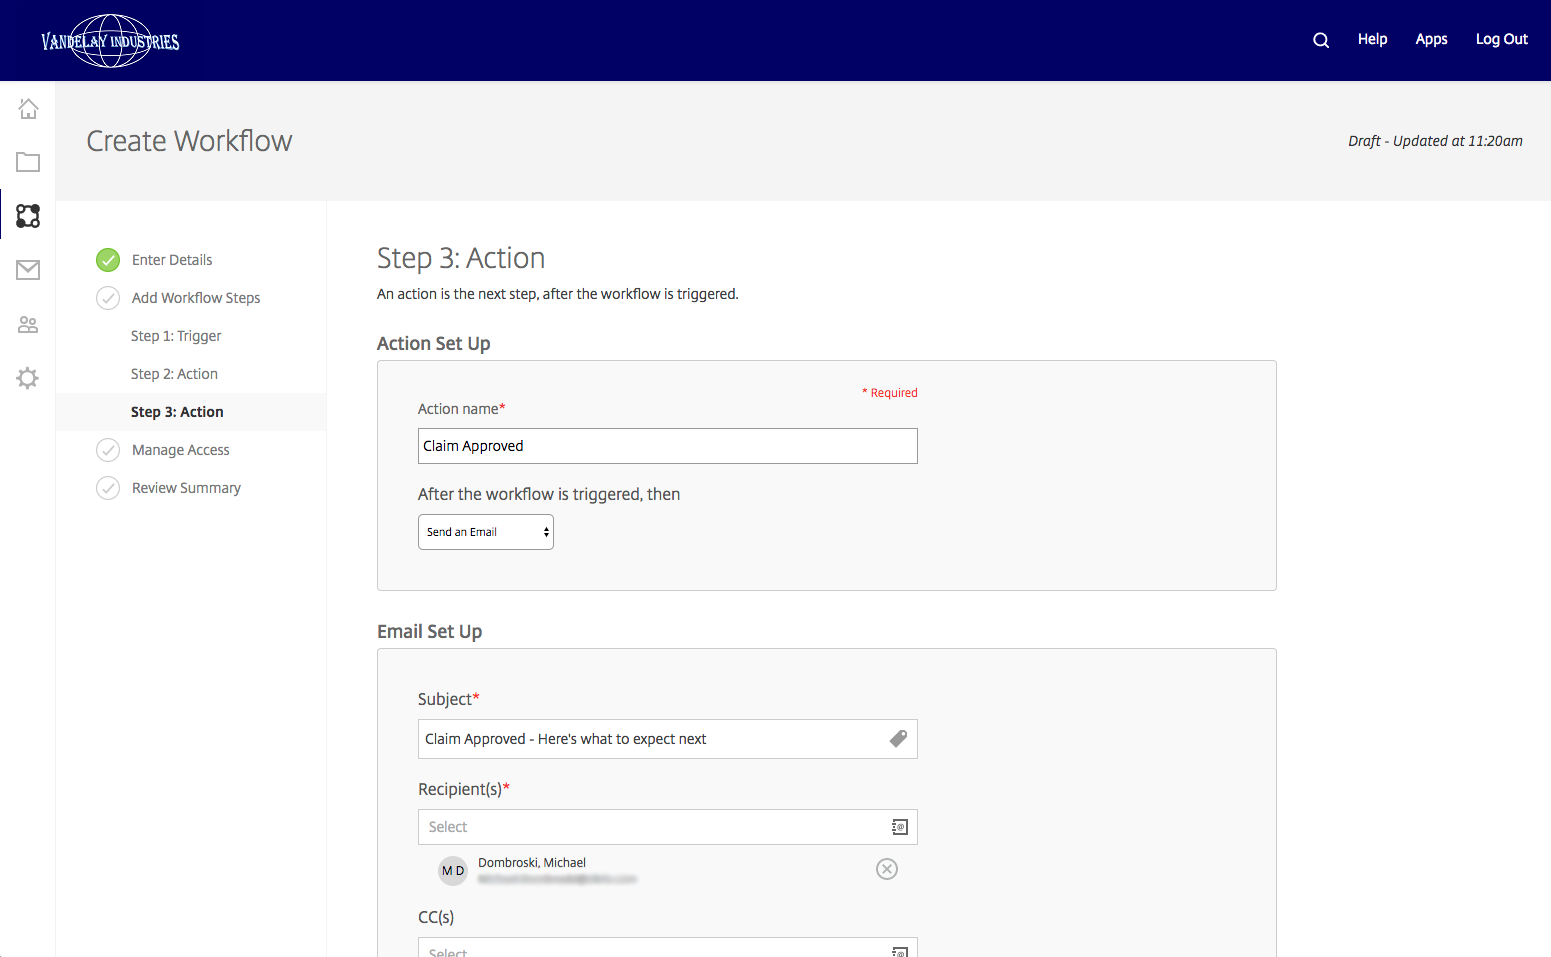 Create workflow - action 2